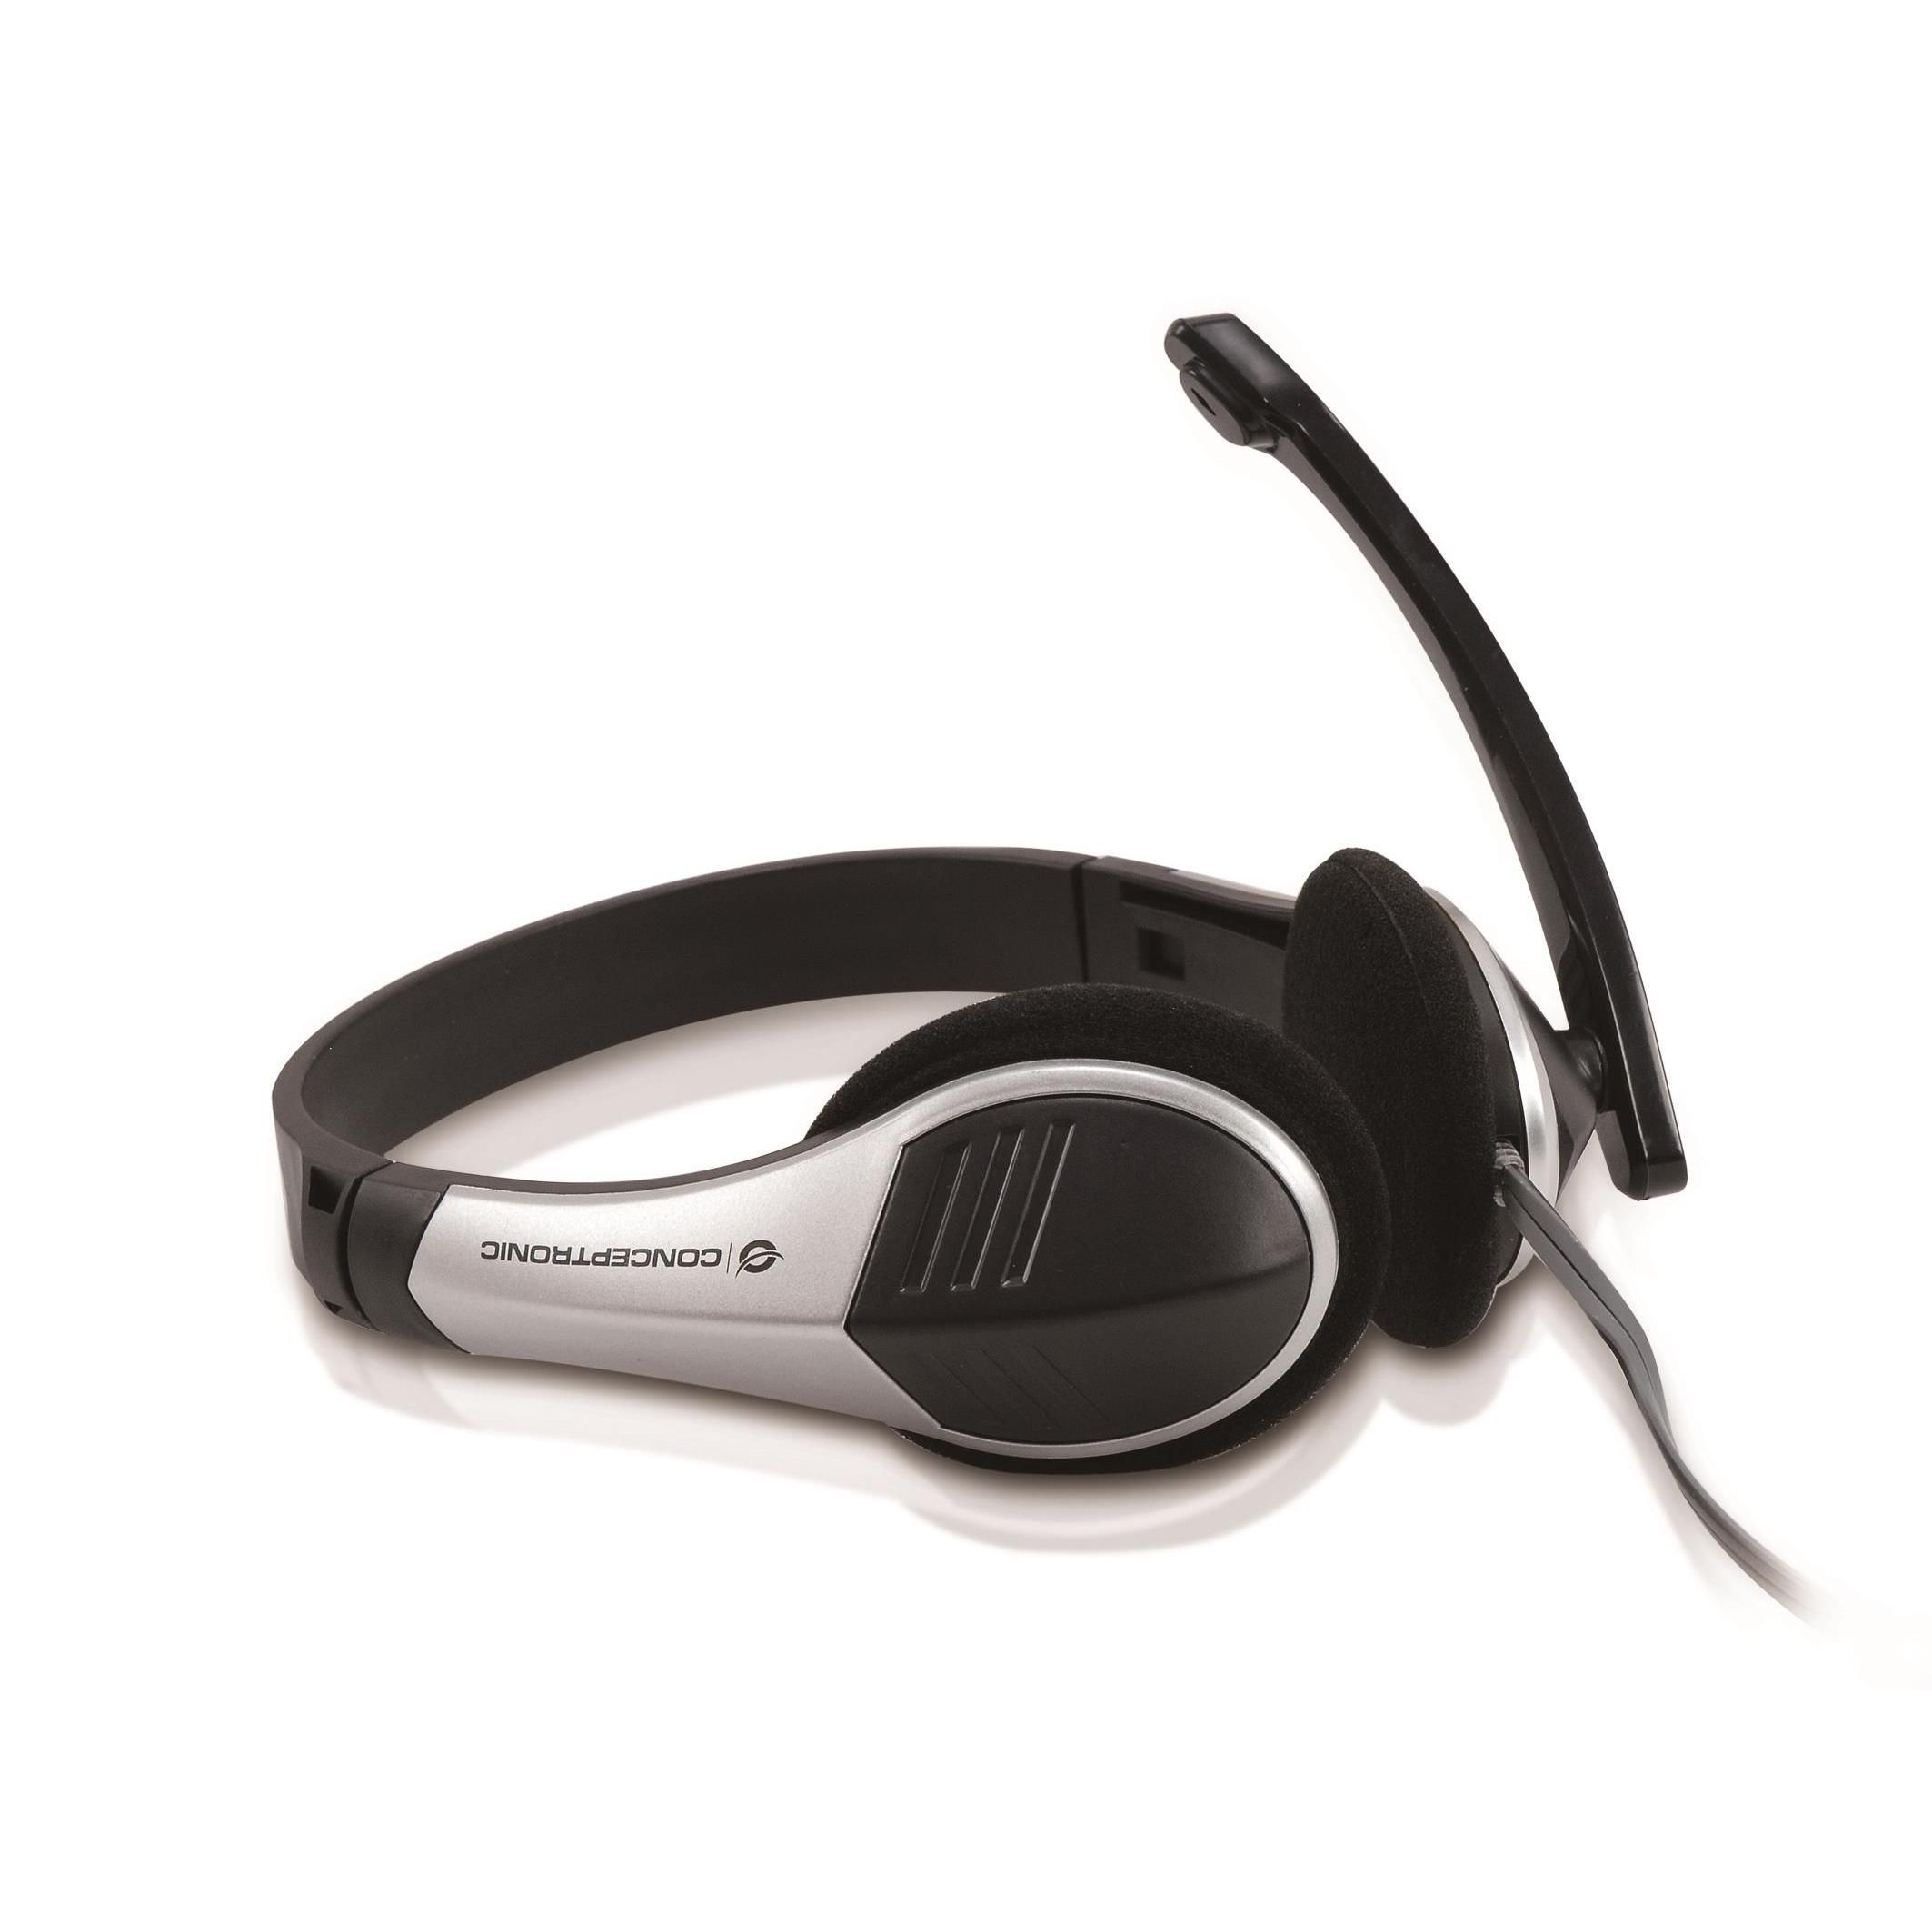 Conceptronic Comfortable Stereo Headset